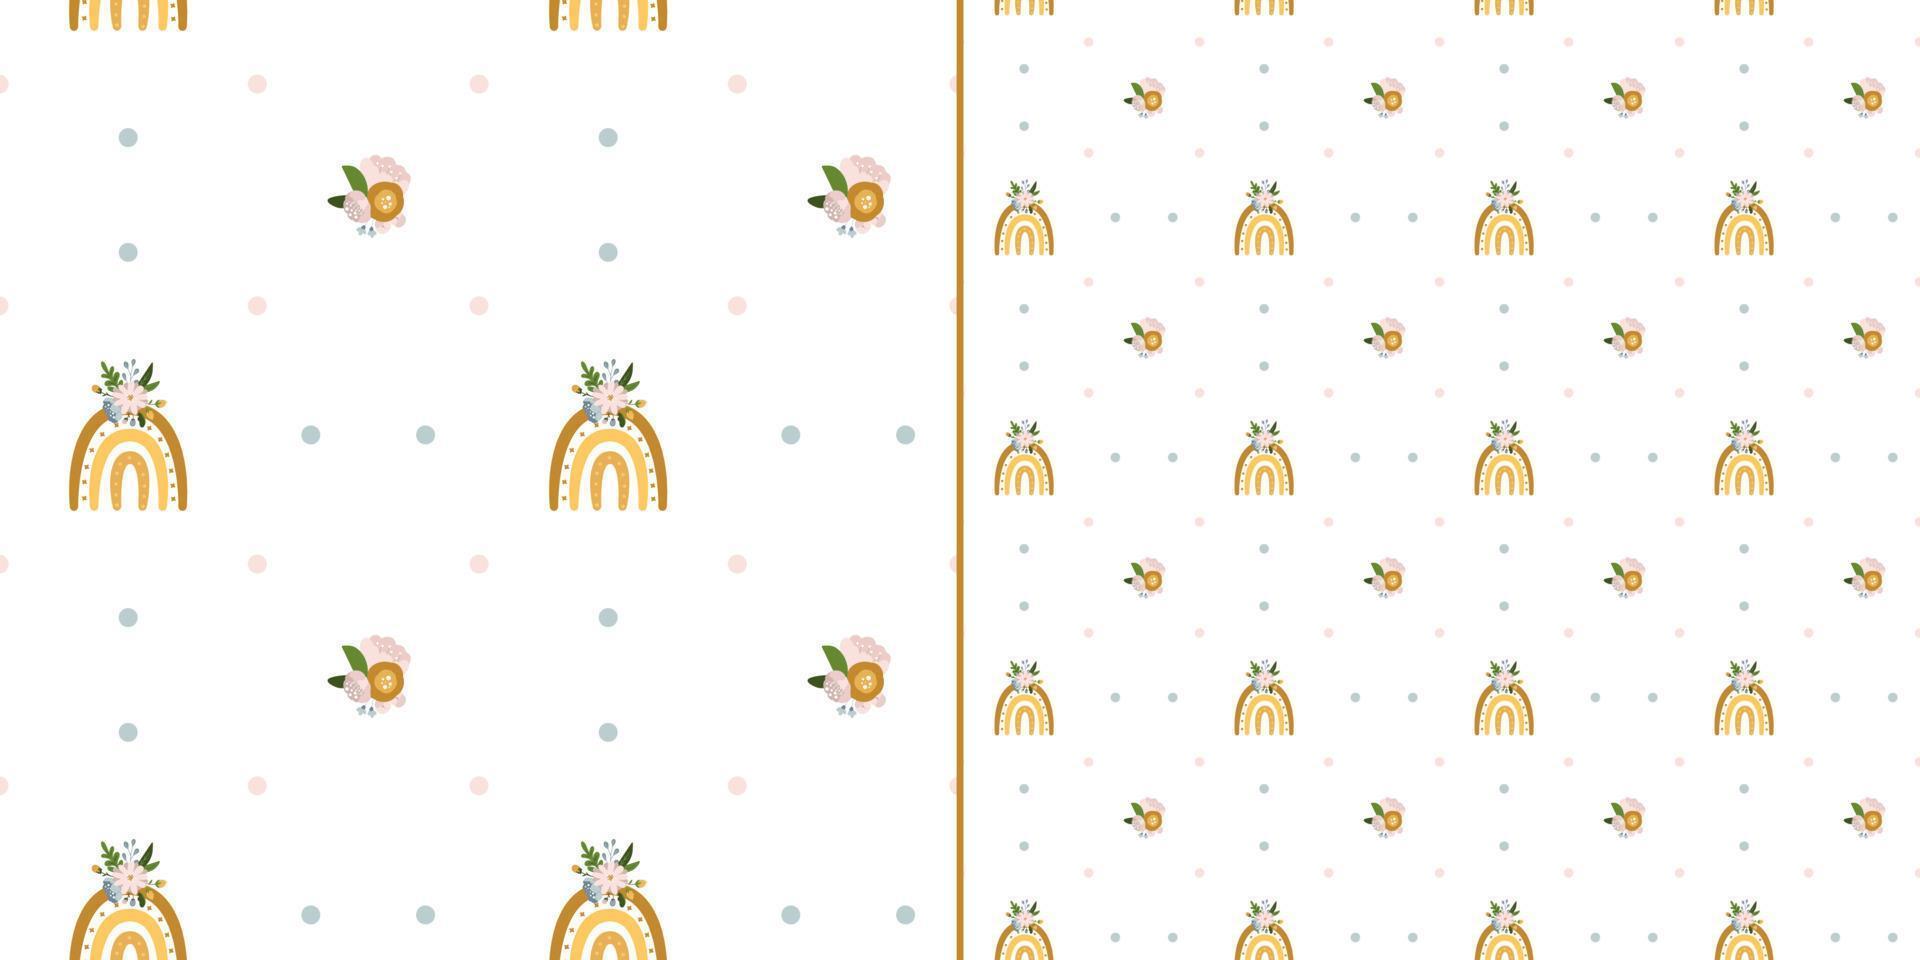 Hand drawn vector seamless backgrounds for kids, with cute rainbows. Children's texture in scandinavian style for fabric, textile, clothing, nursery decoration. Vector illustration